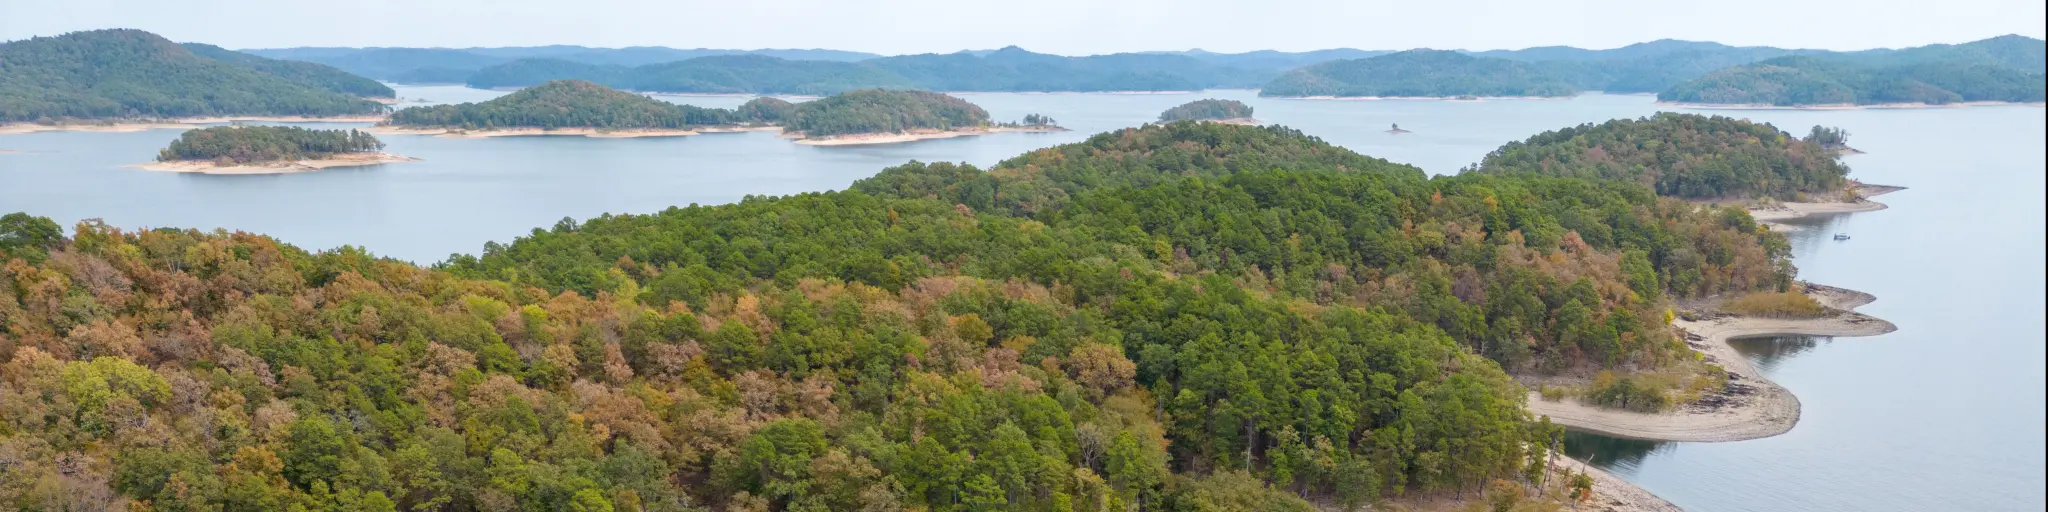 Aerial view of landscape of the surface of the water of Broken Bow lake, Oklahoma, USA